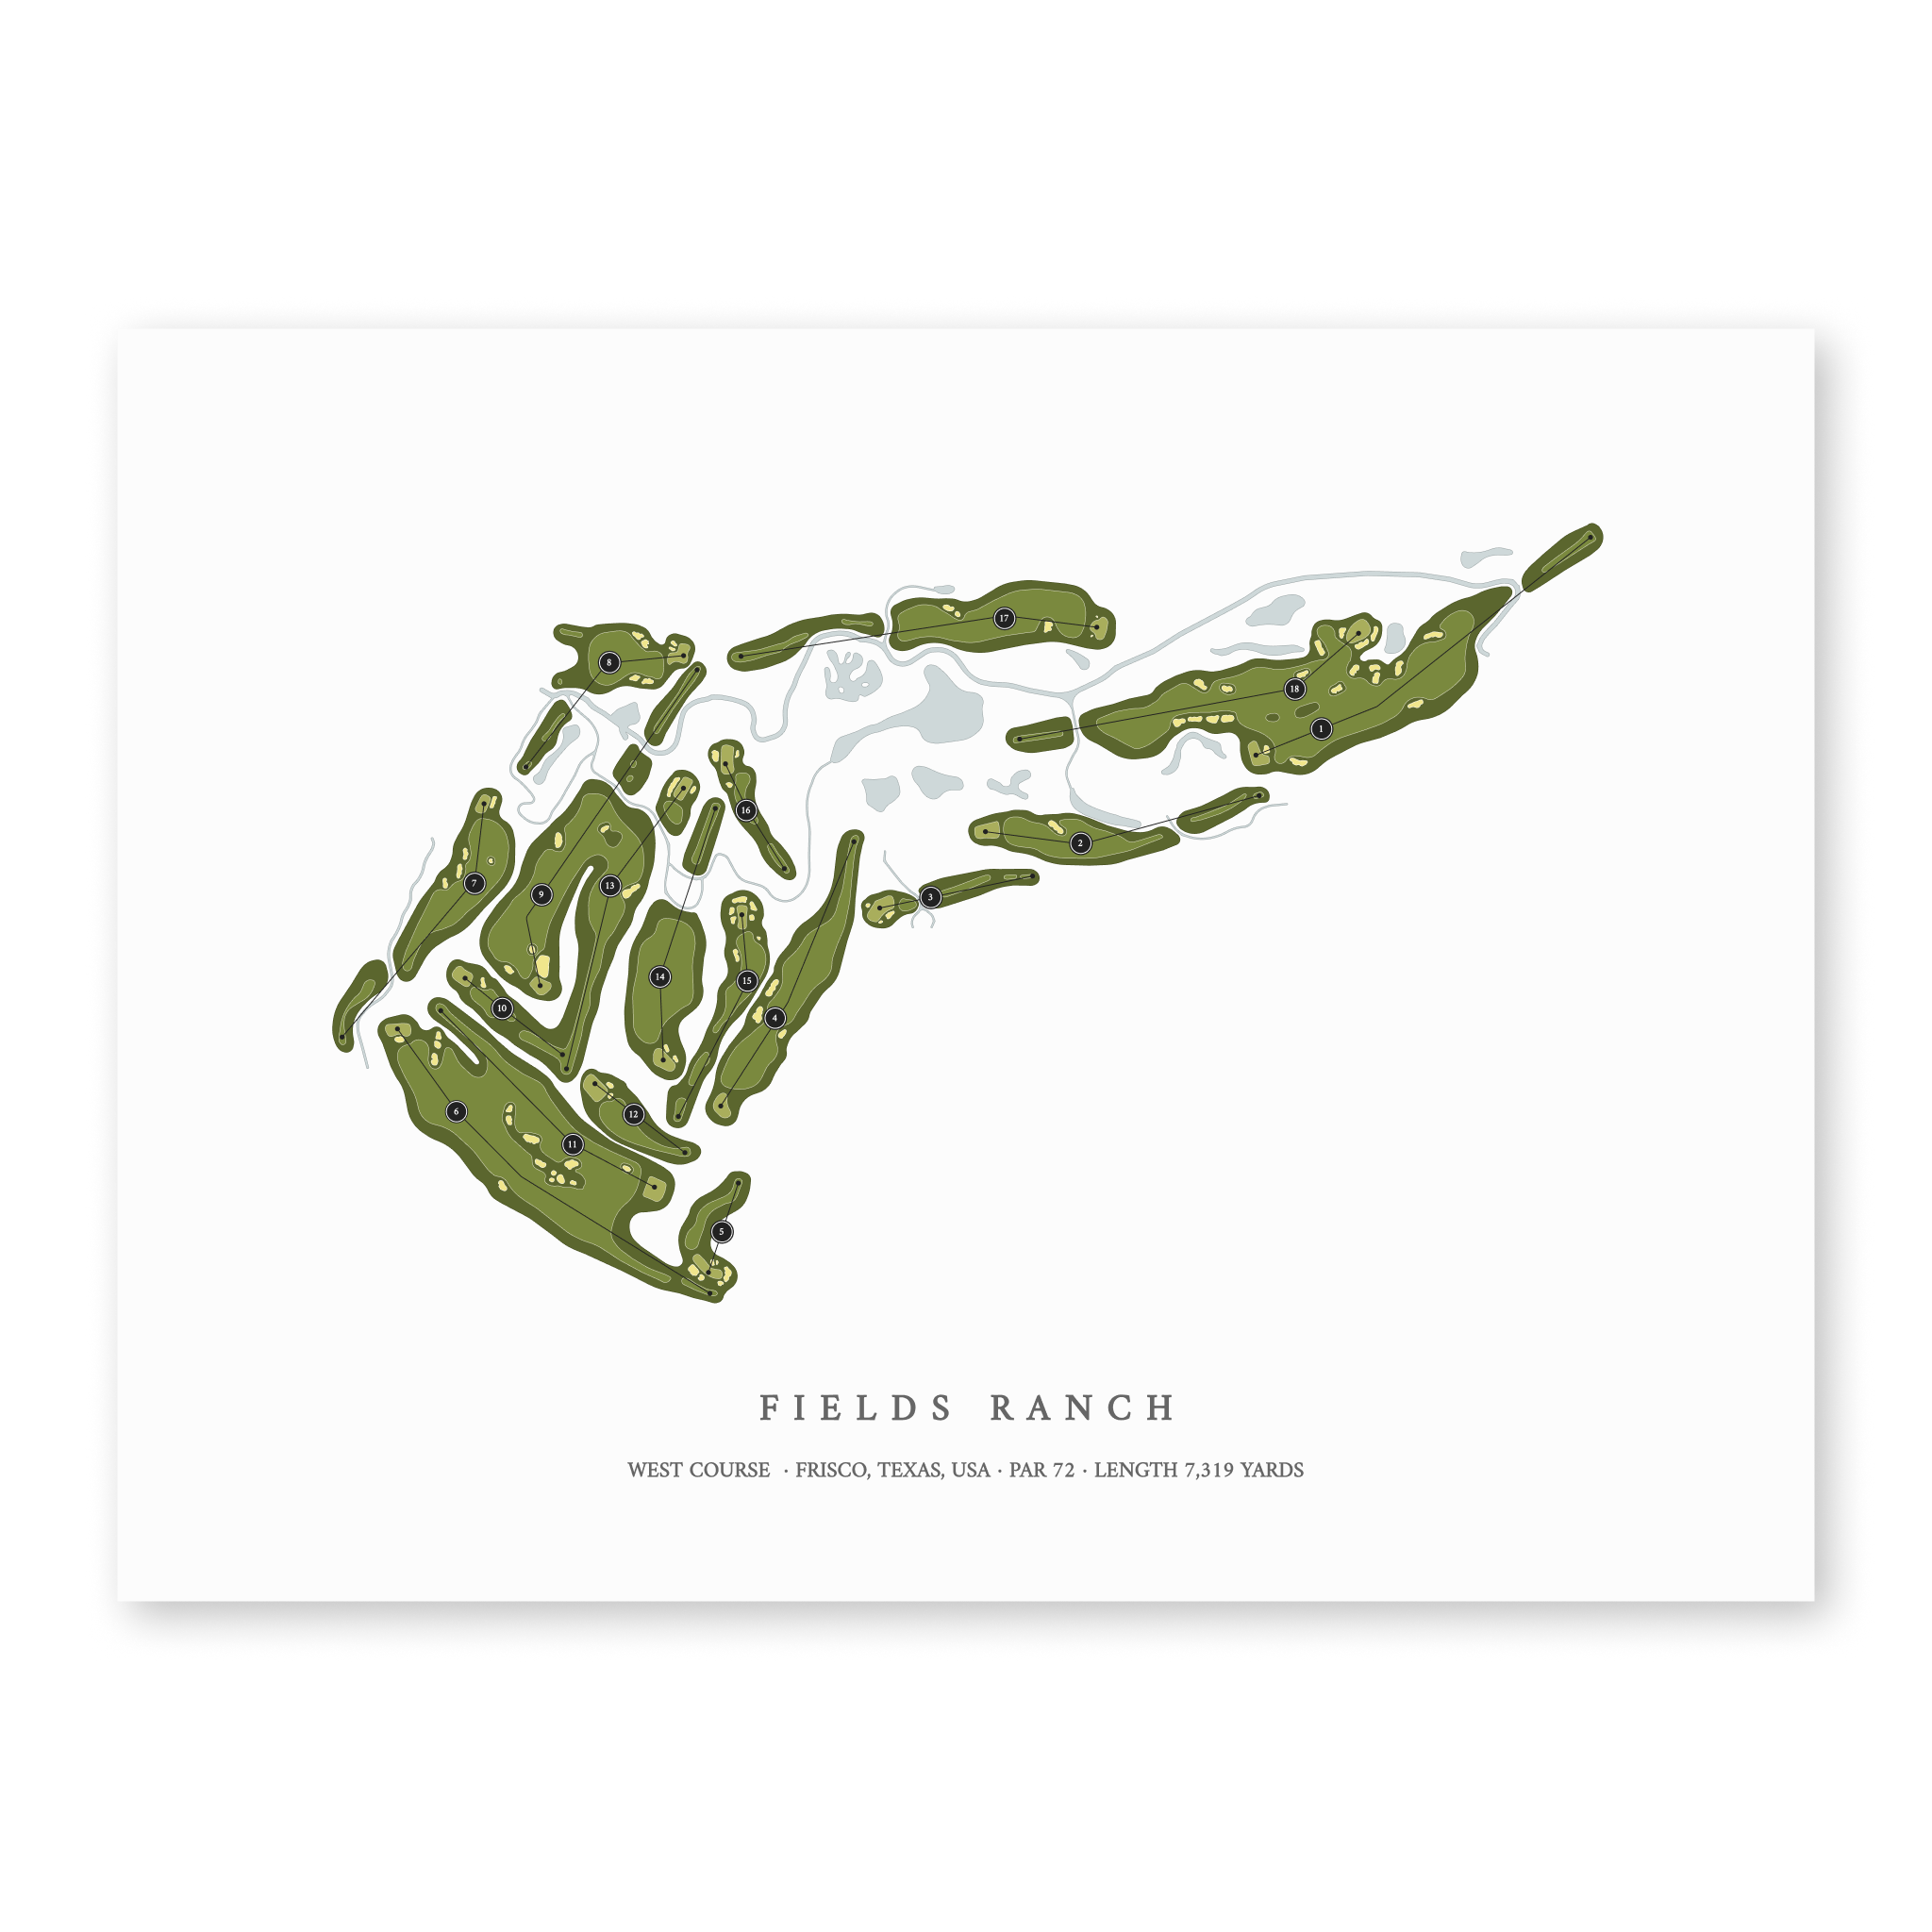 Fields Ranch - West Course | Golf Course Map | Unframed With Hole Numbers #hole numbers_yes